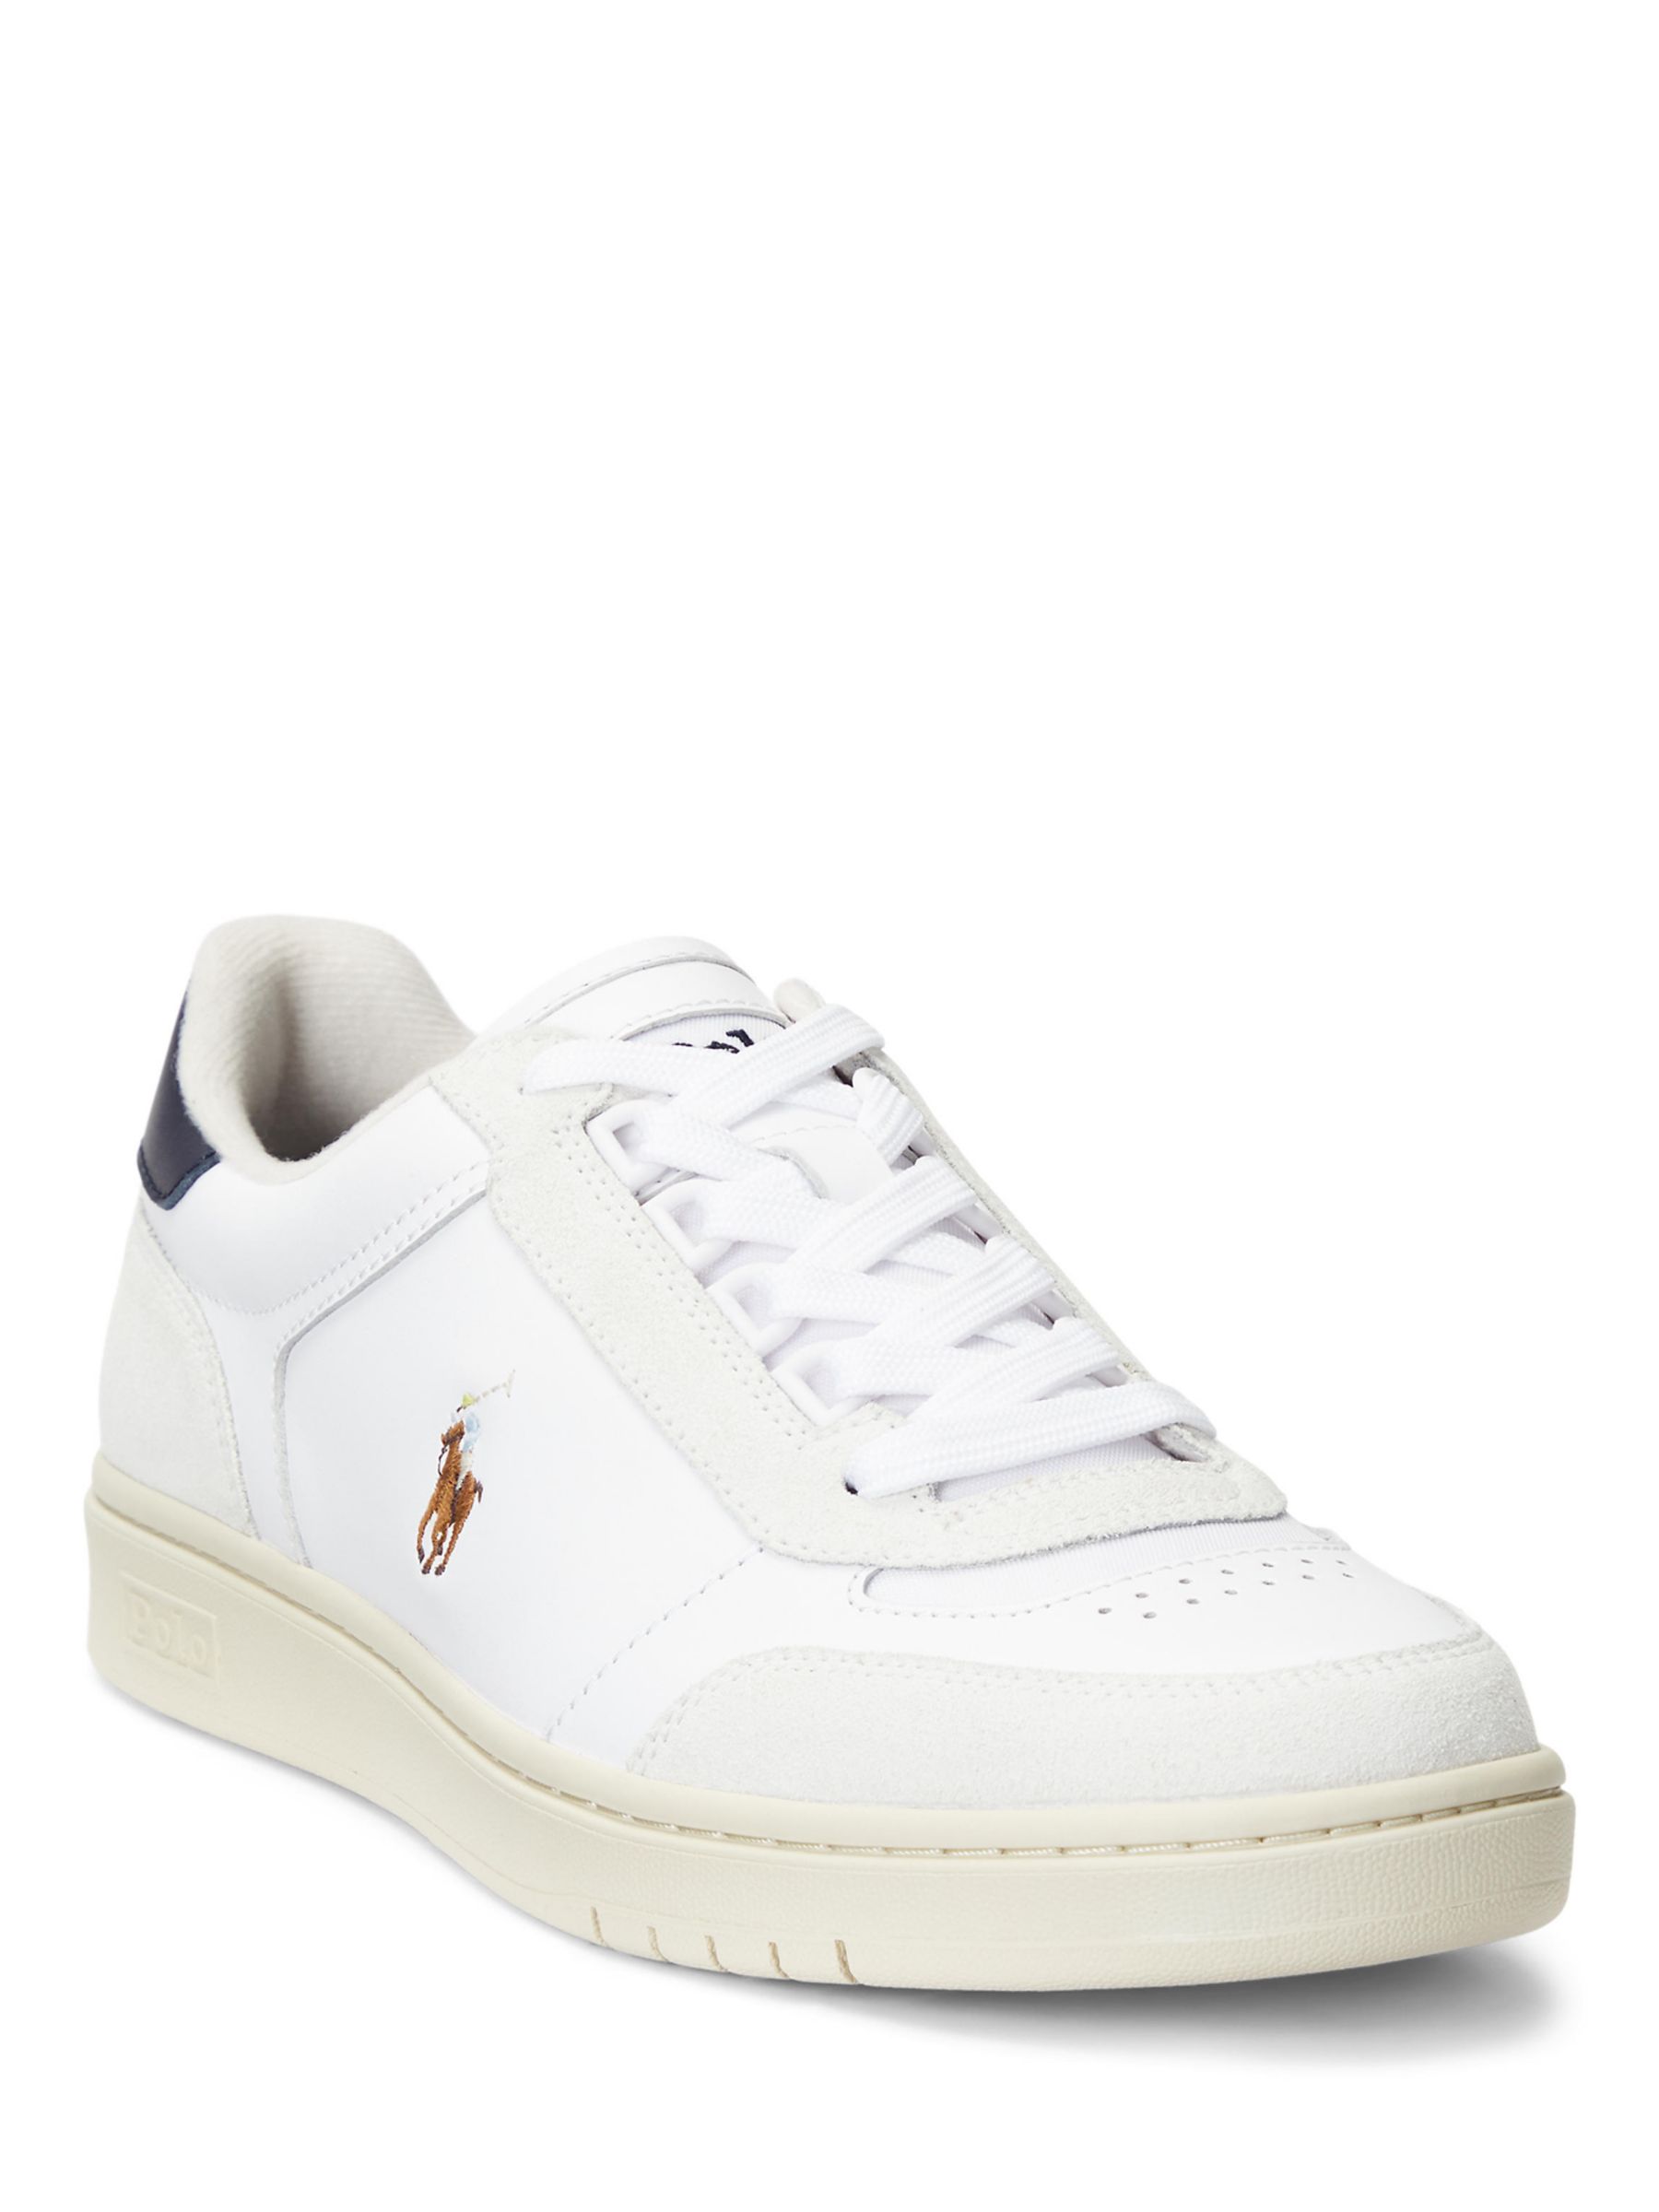 Ralph Lauren Polo Leather Suede Court Trainers, White/Navy, 7